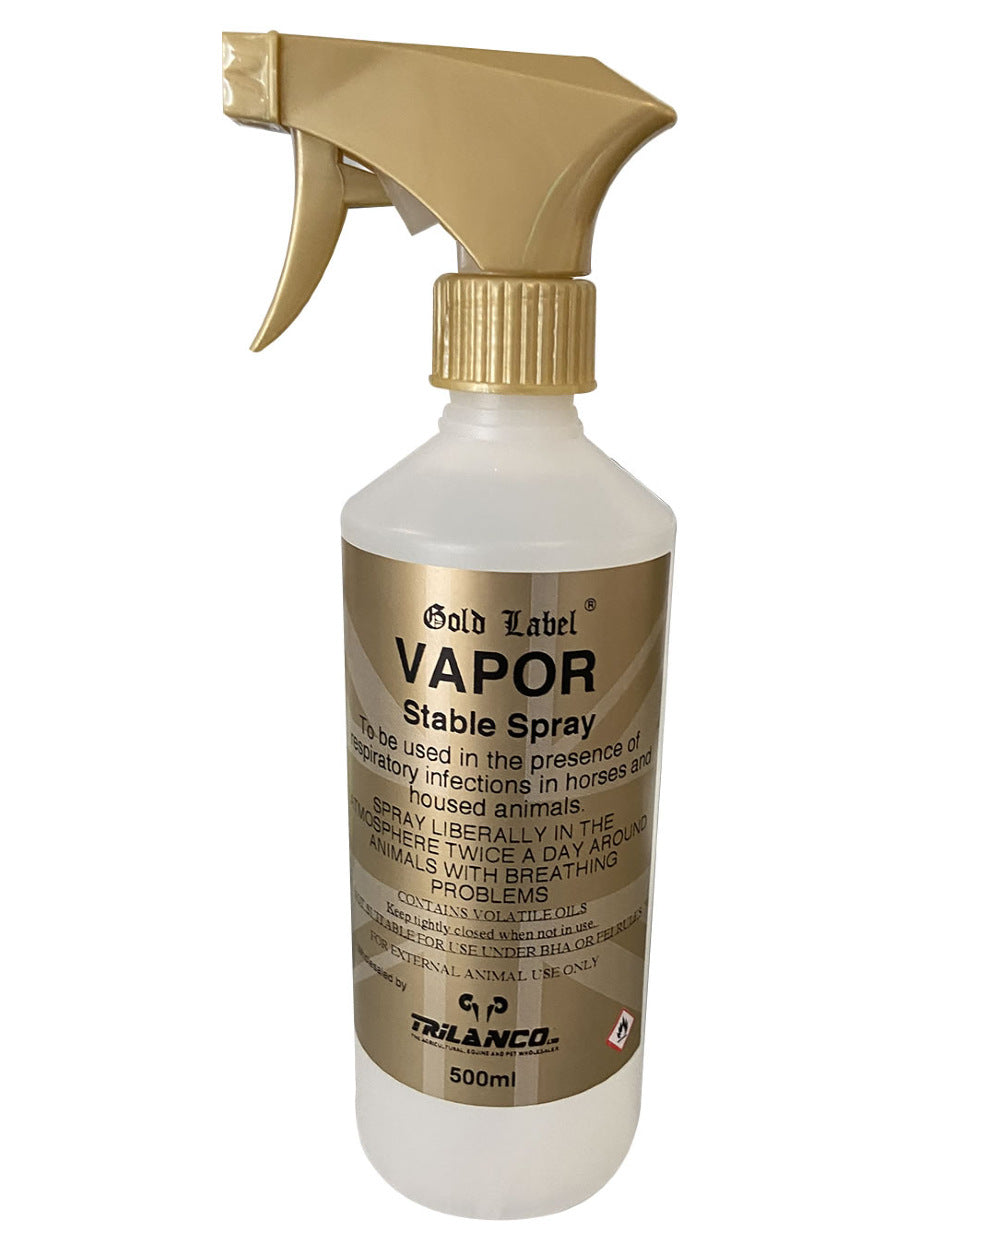 Gold Label Vapor Stable Spray On A White Background